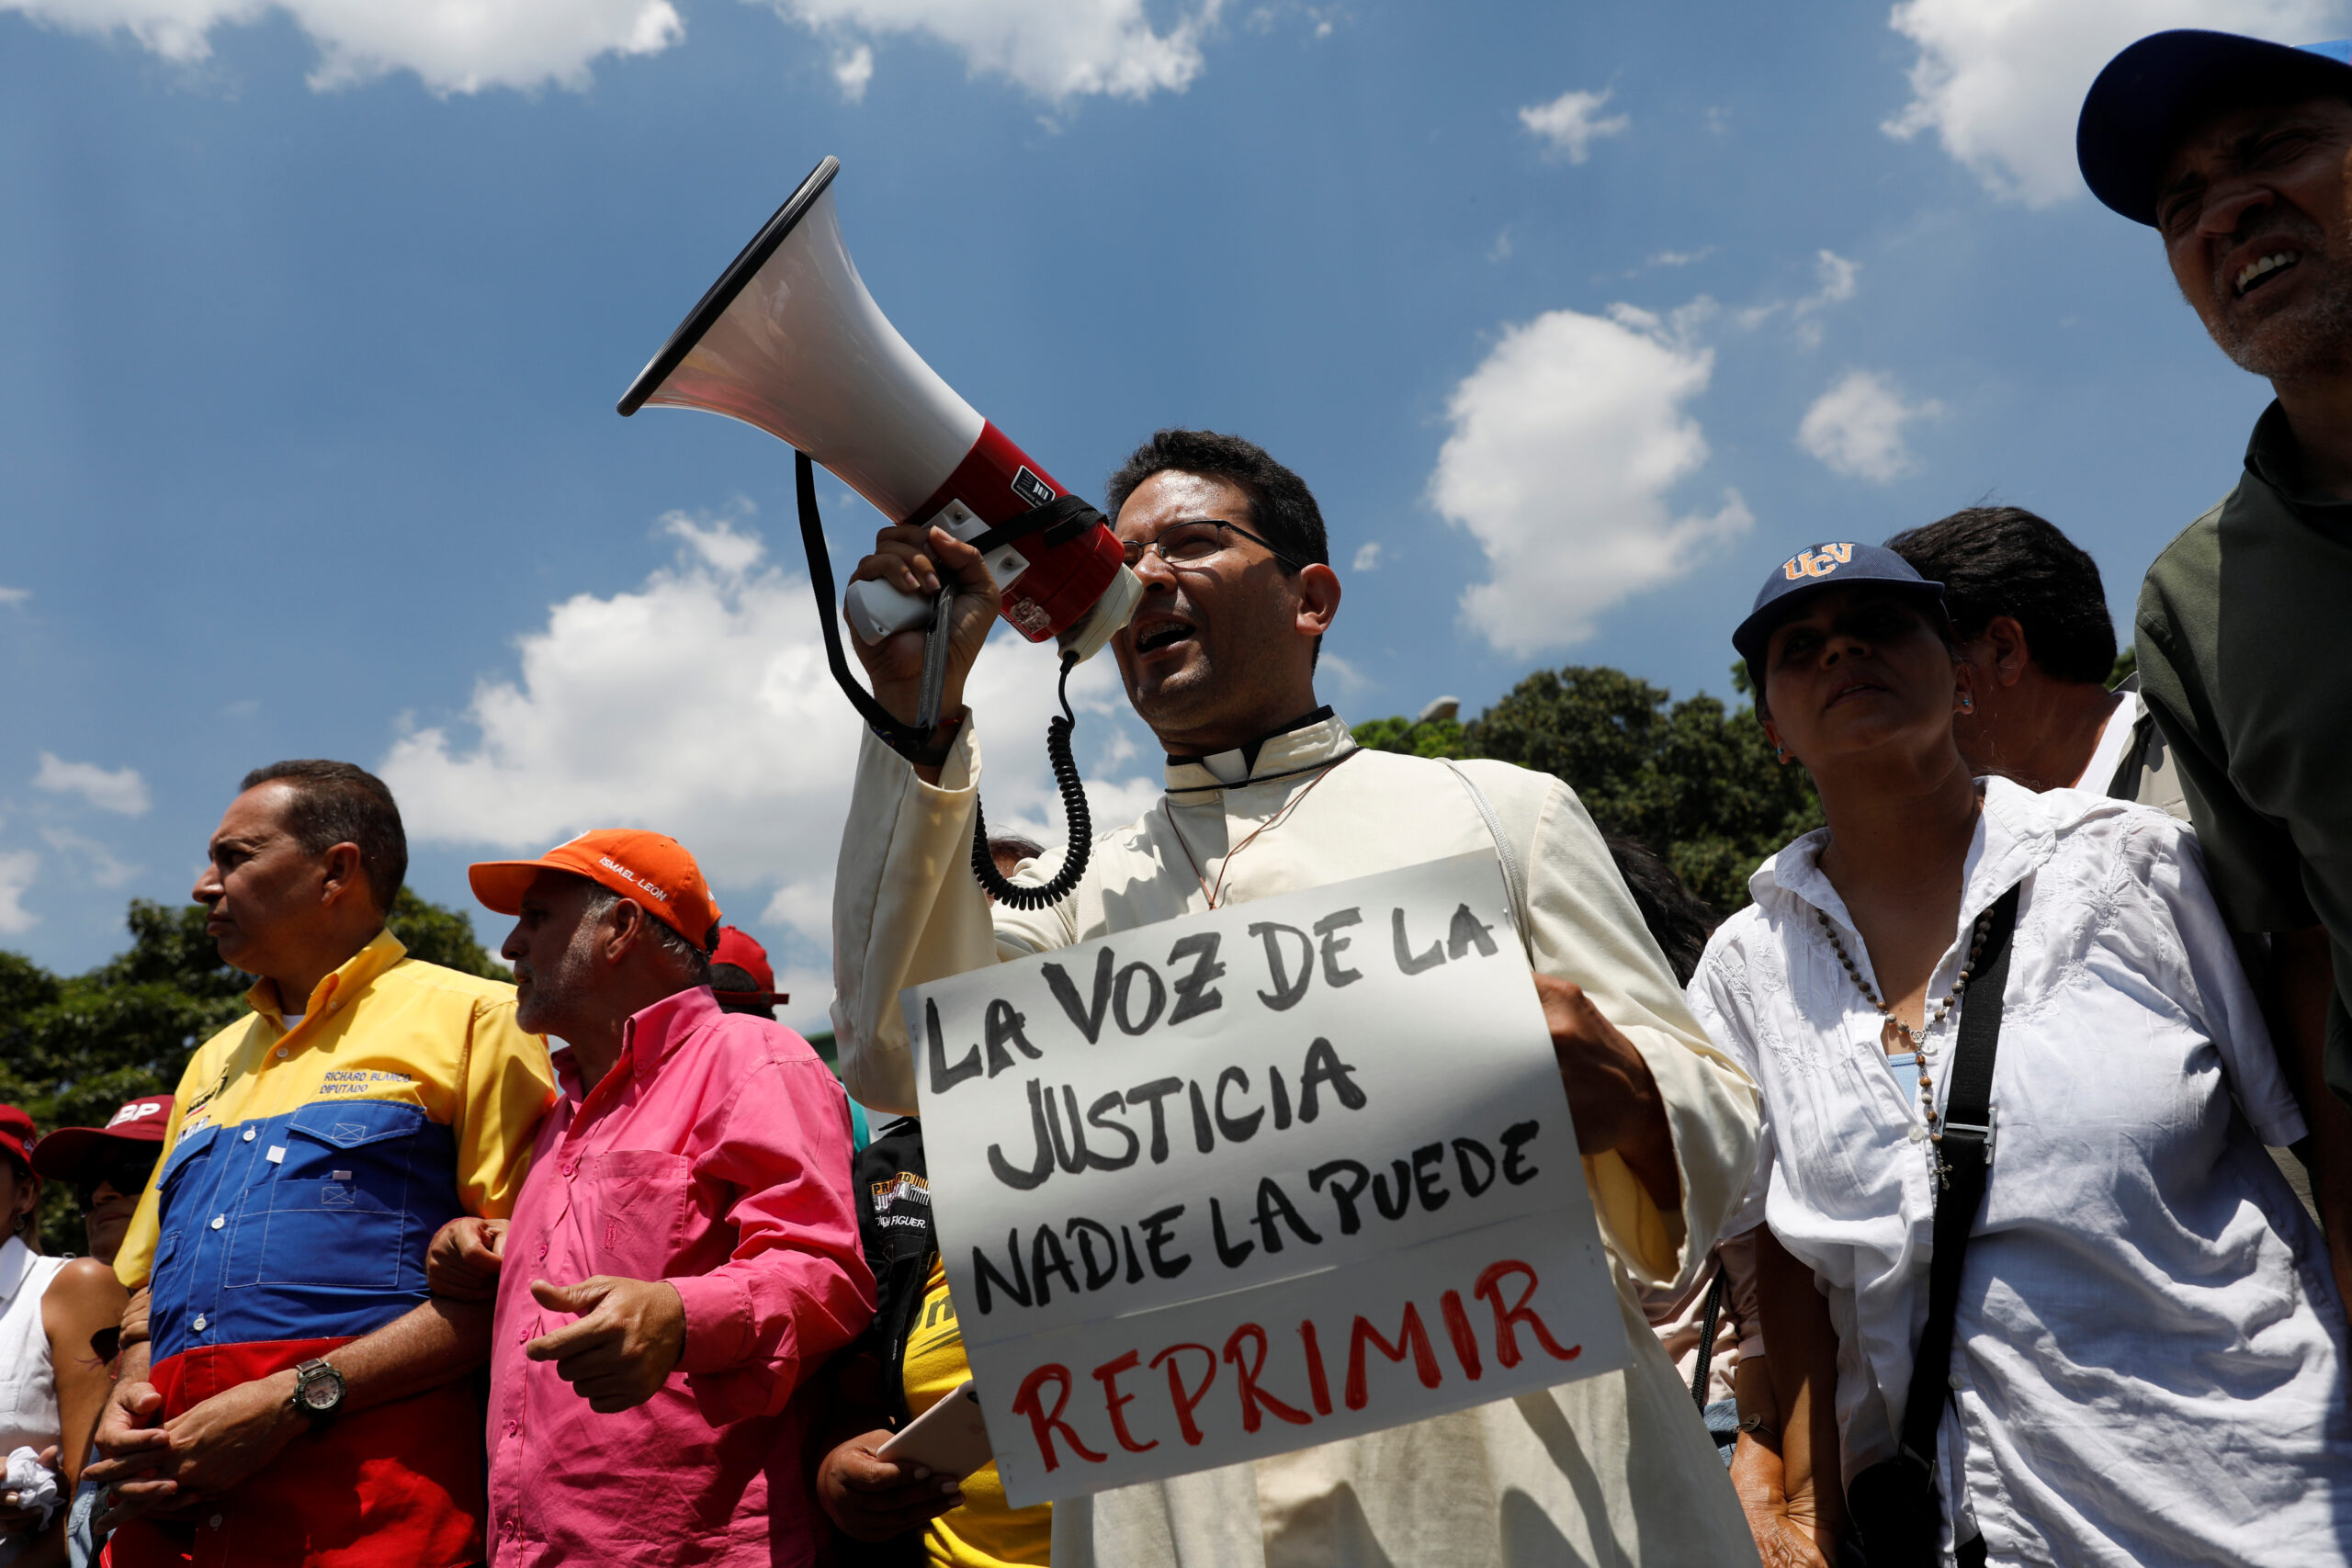 A priest uses a megaphone while holding a sign that reads 'Nobody can repress the voice of justice' in Spanish during a rally against Venezuela's President Nicolas Maduro in Caracas, Venezuela